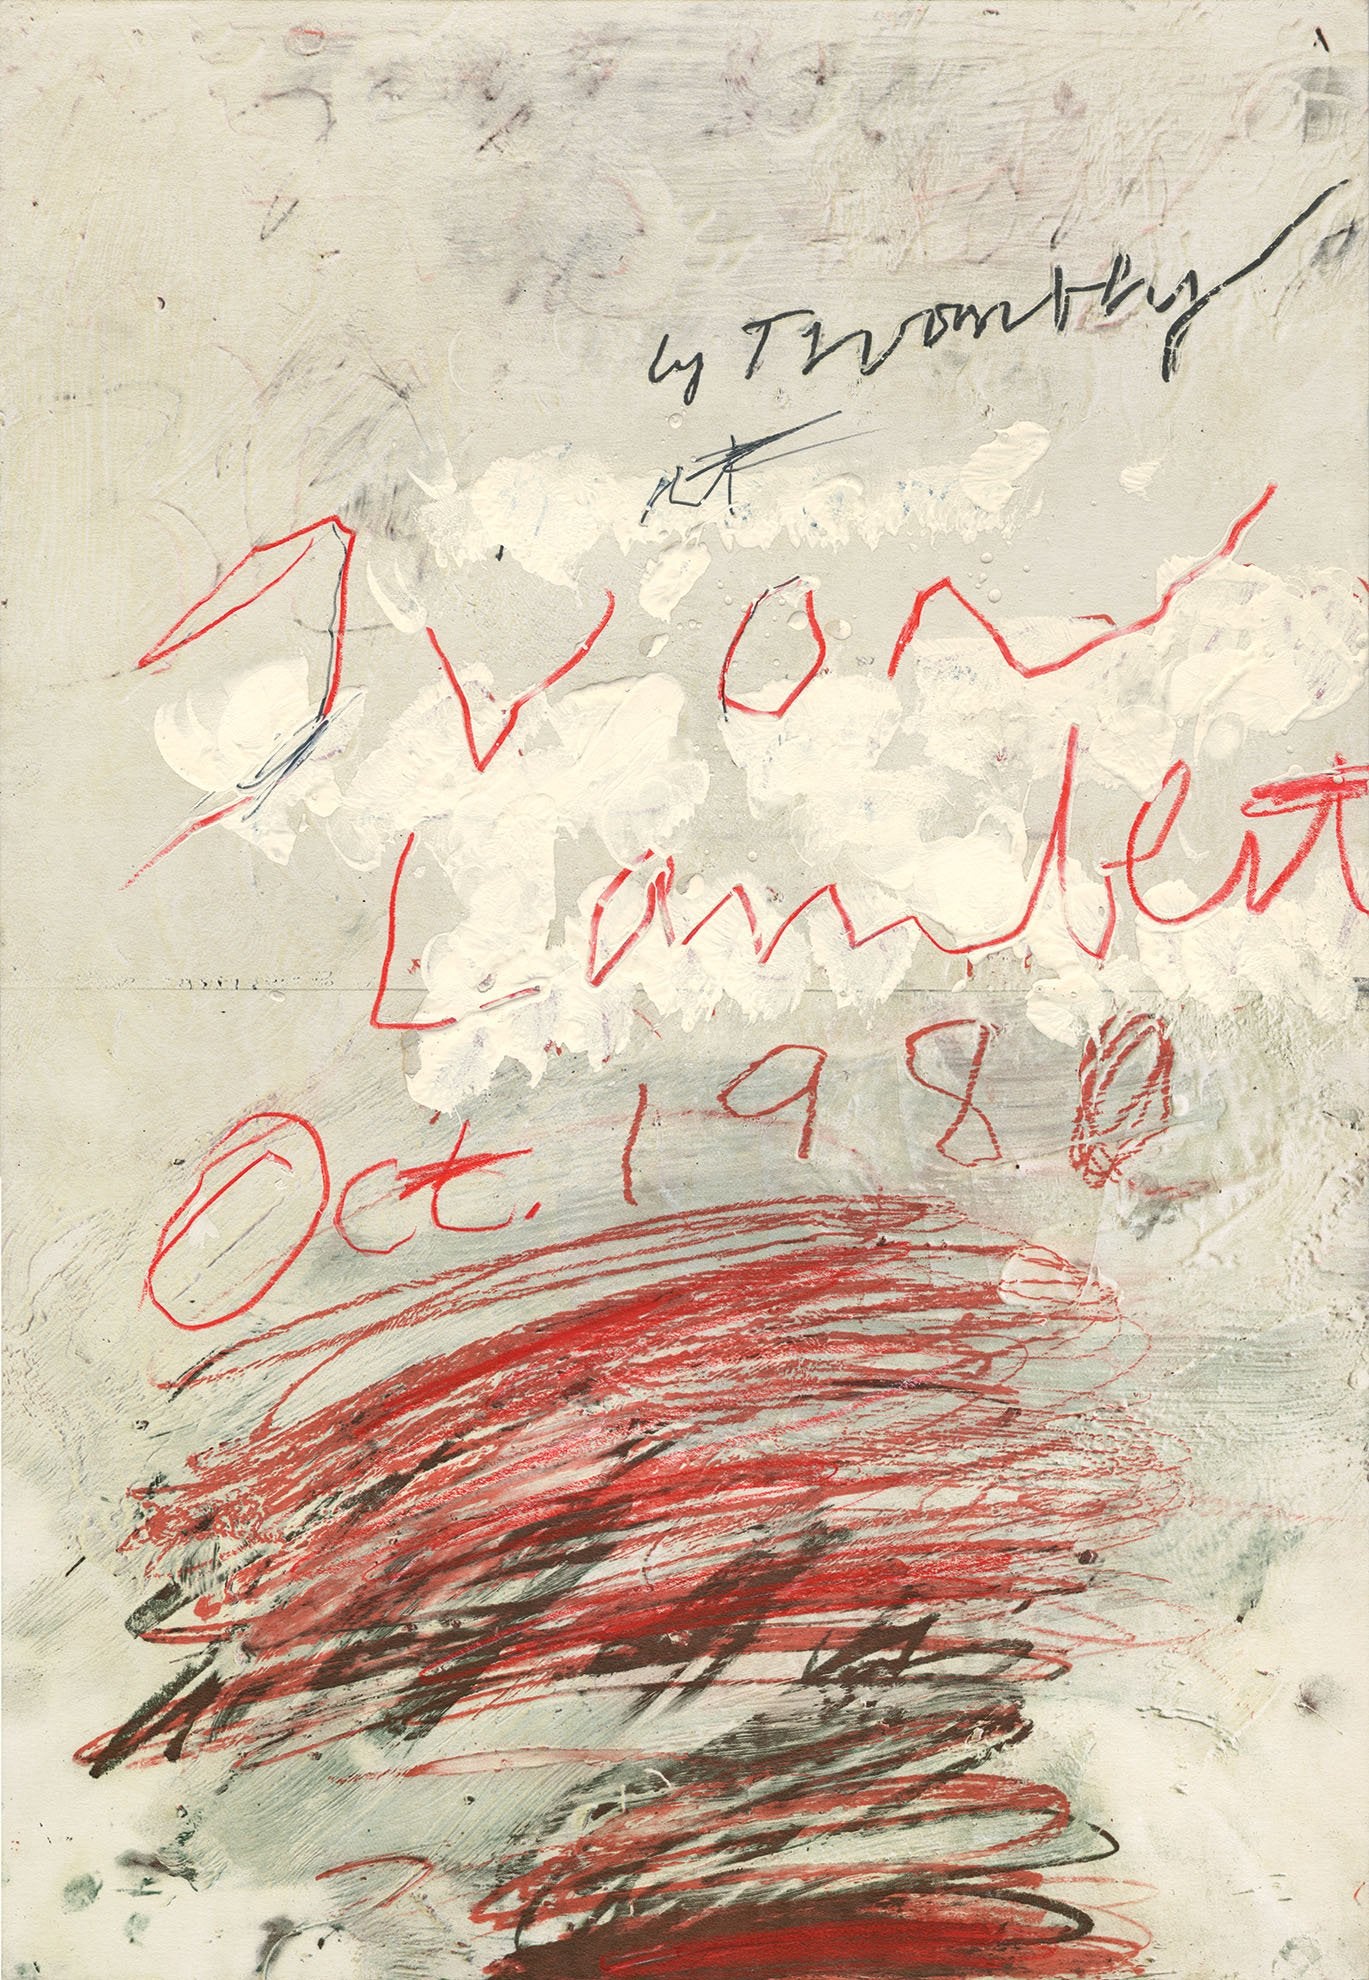 Cy Twombly - Poster project (1980)